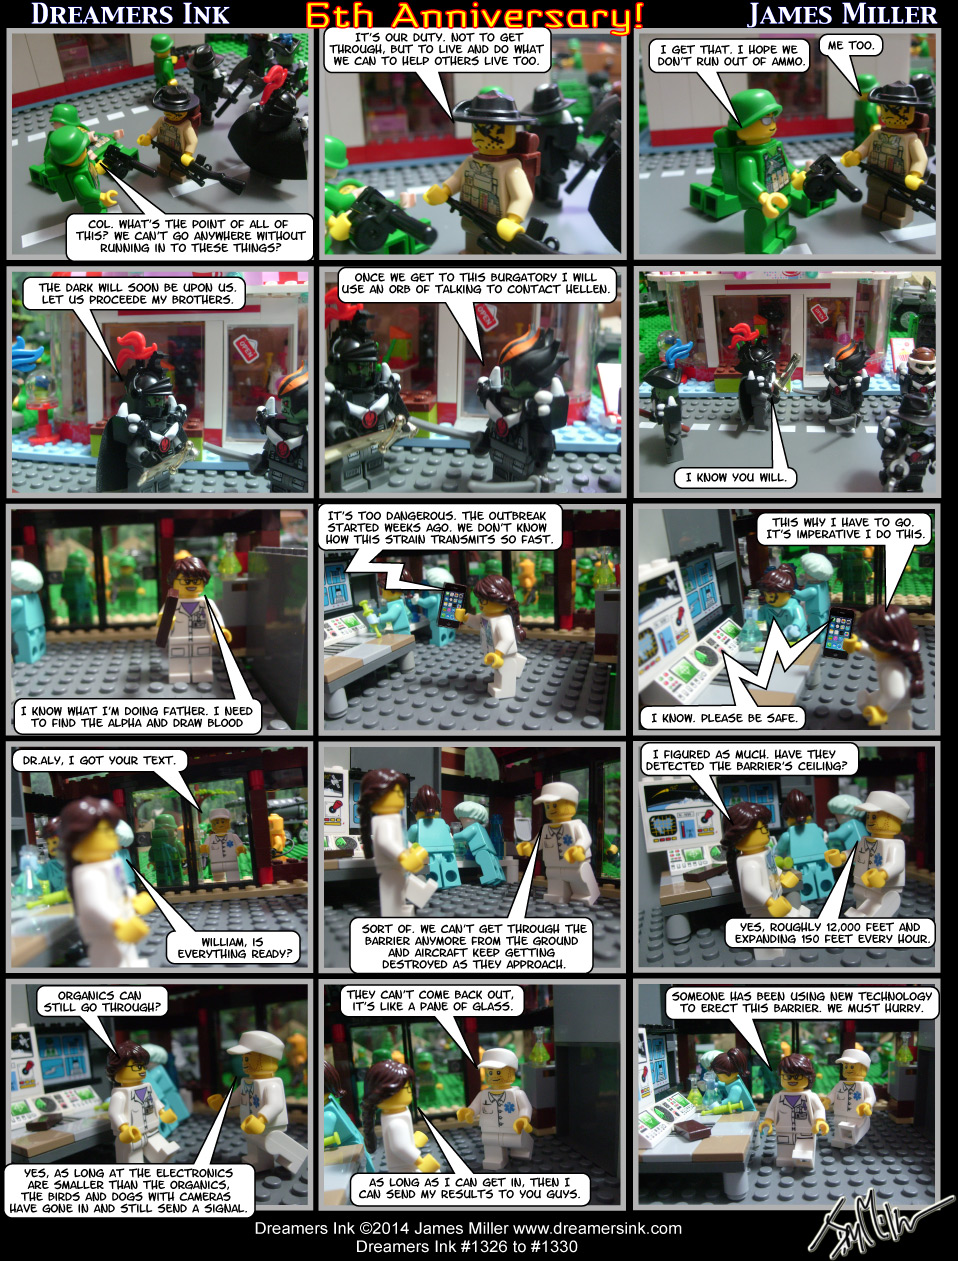 Strips #1326 To #1330